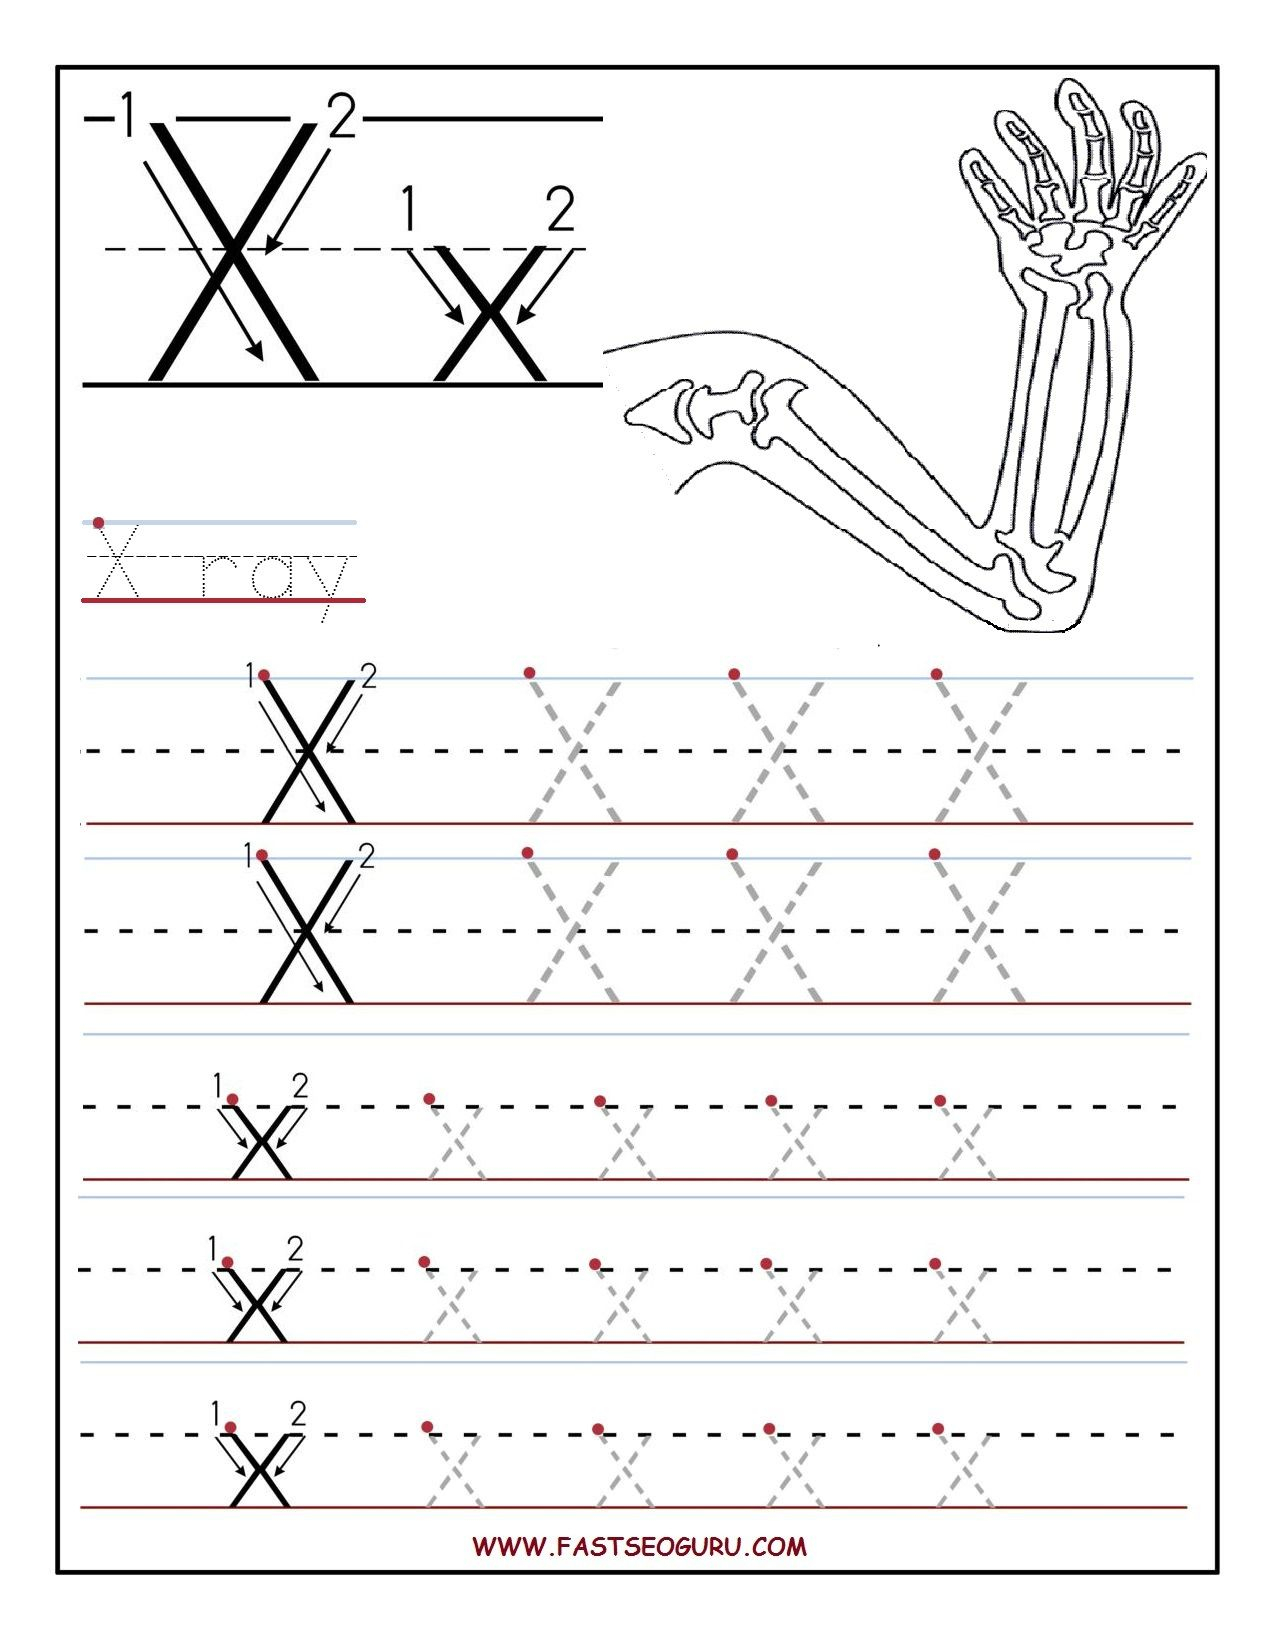 Printable Letter X Tracing Worksheets For Preschool intended for Letter X Tracing Preschool